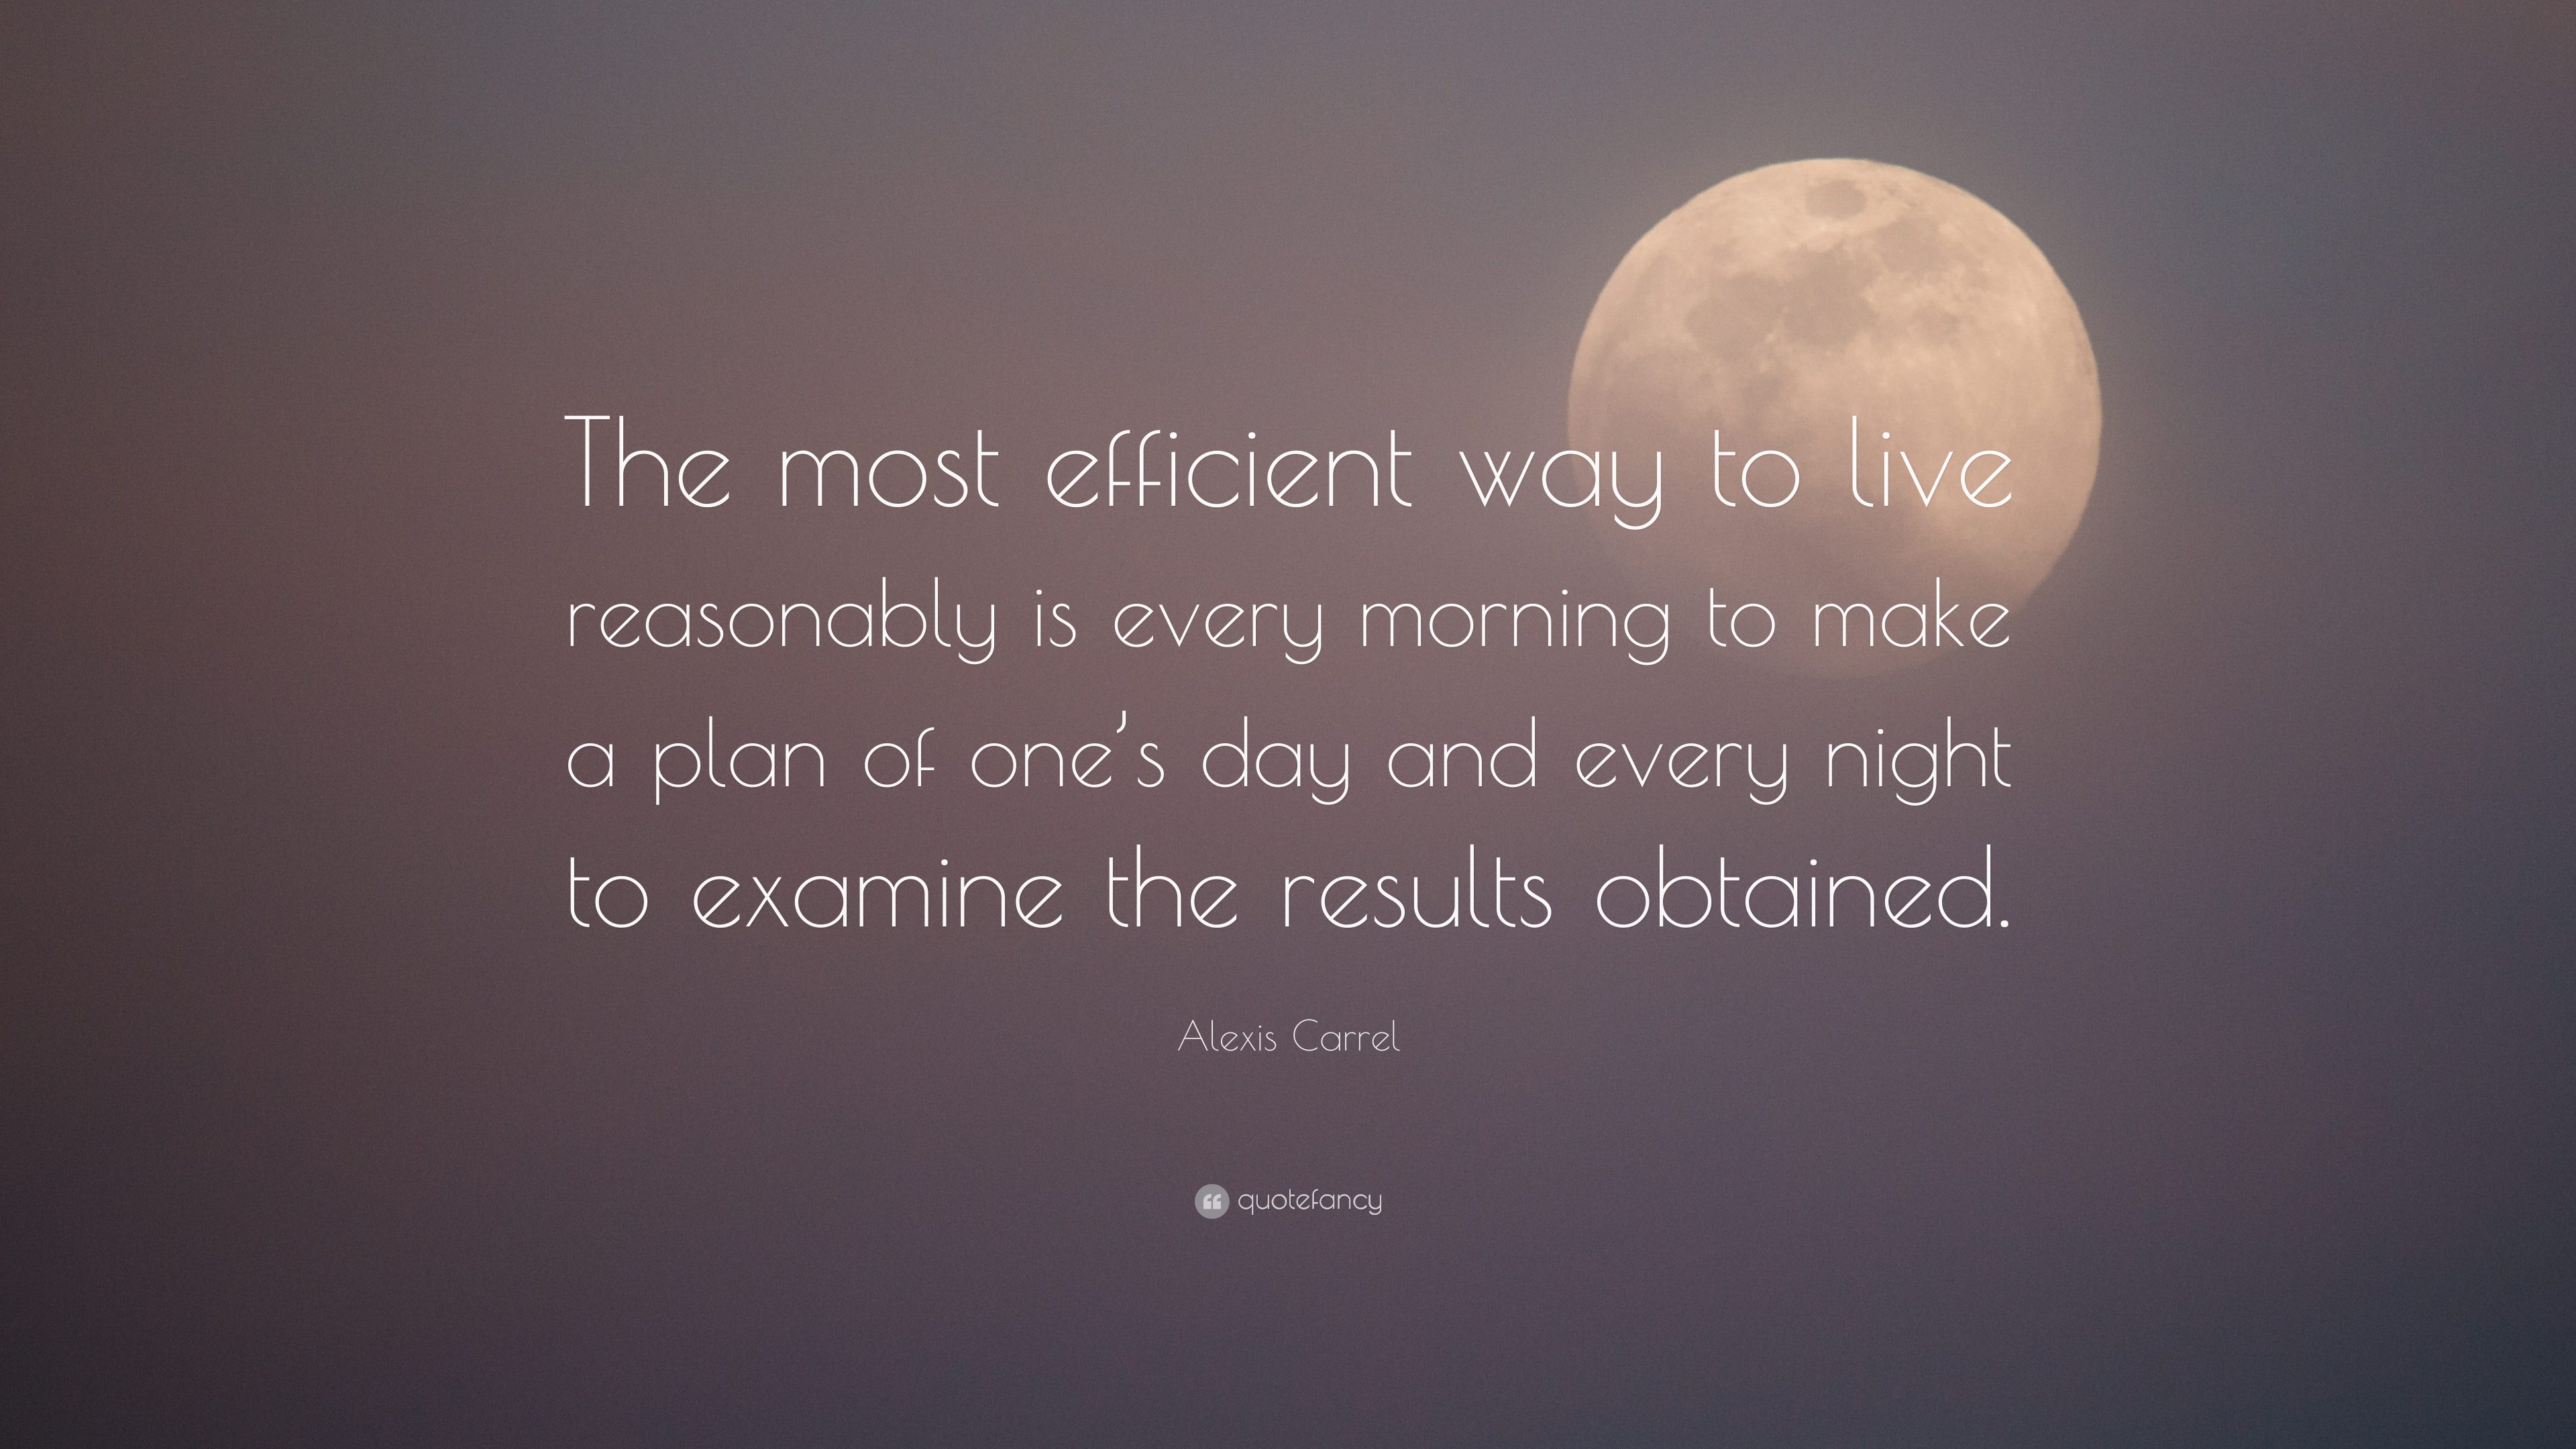 Alexis Carrel Quote The Most Efficient Way To Live Reasonably Is Every Morning To Make A Plan Of One S Day And Every Night To Examine The Re